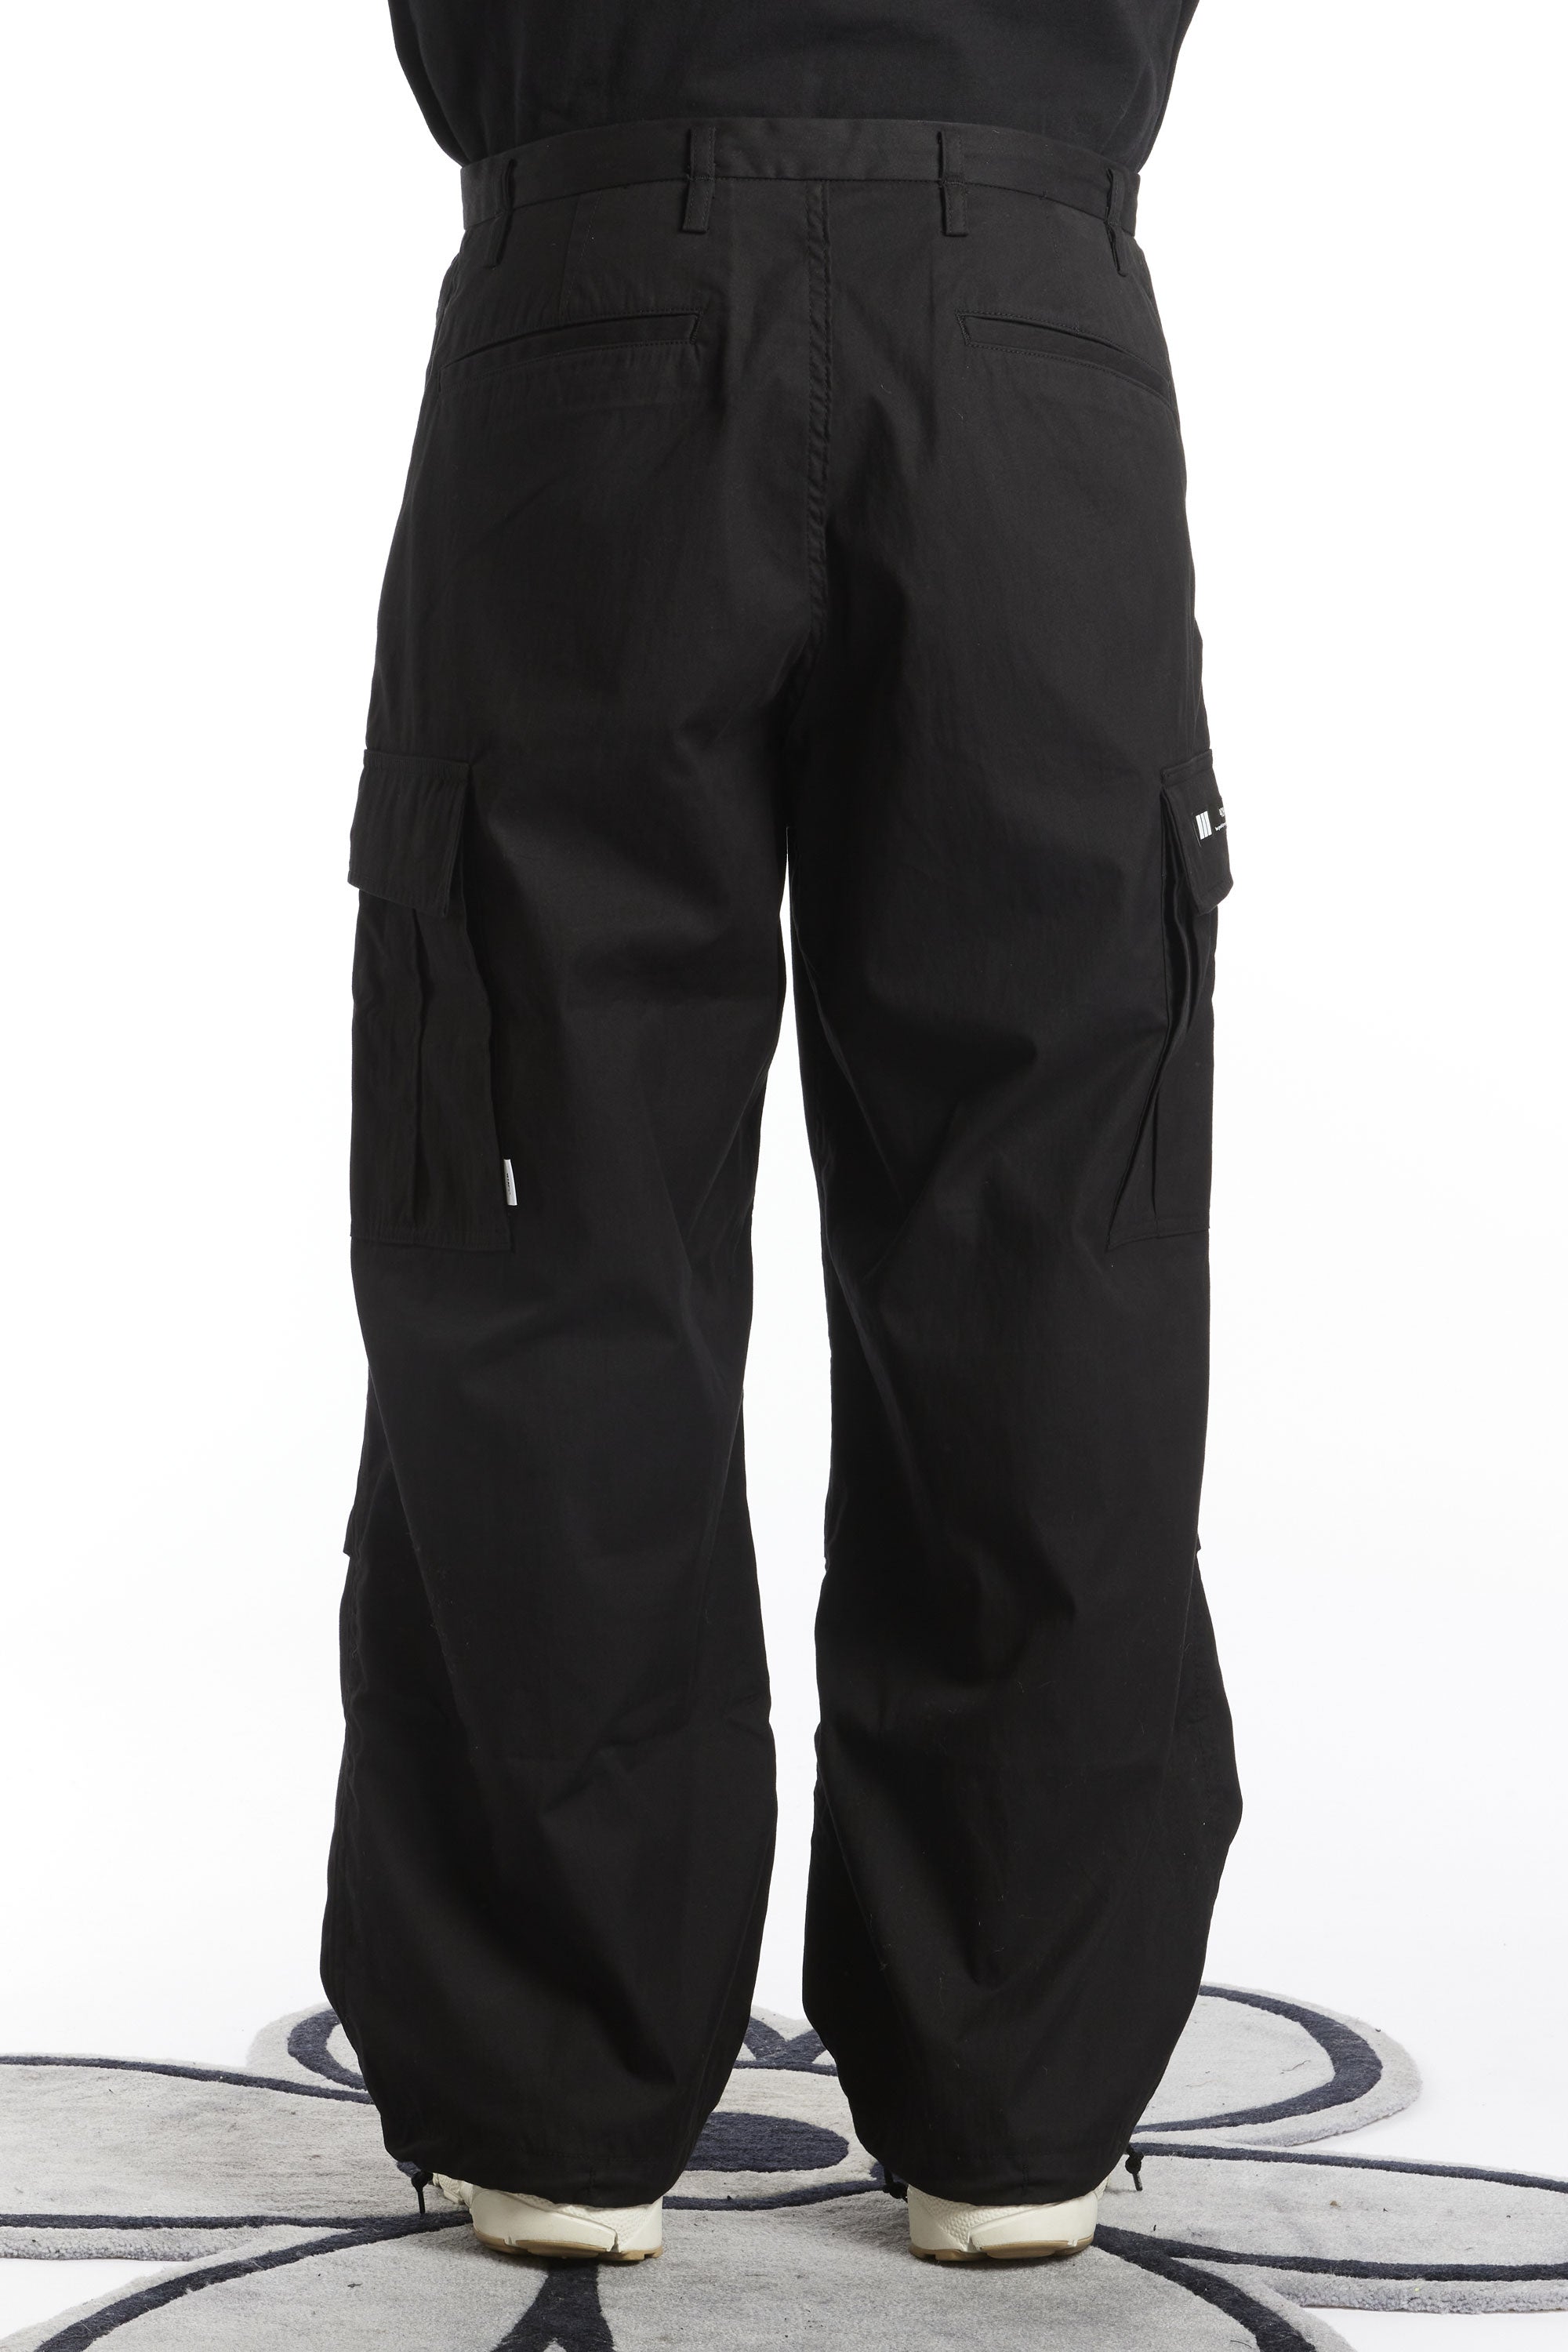 The WTAPS - MILT001 OXFORD TROUSERS  available online with global shipping, and in PAM Stores Melbourne and Sydney.